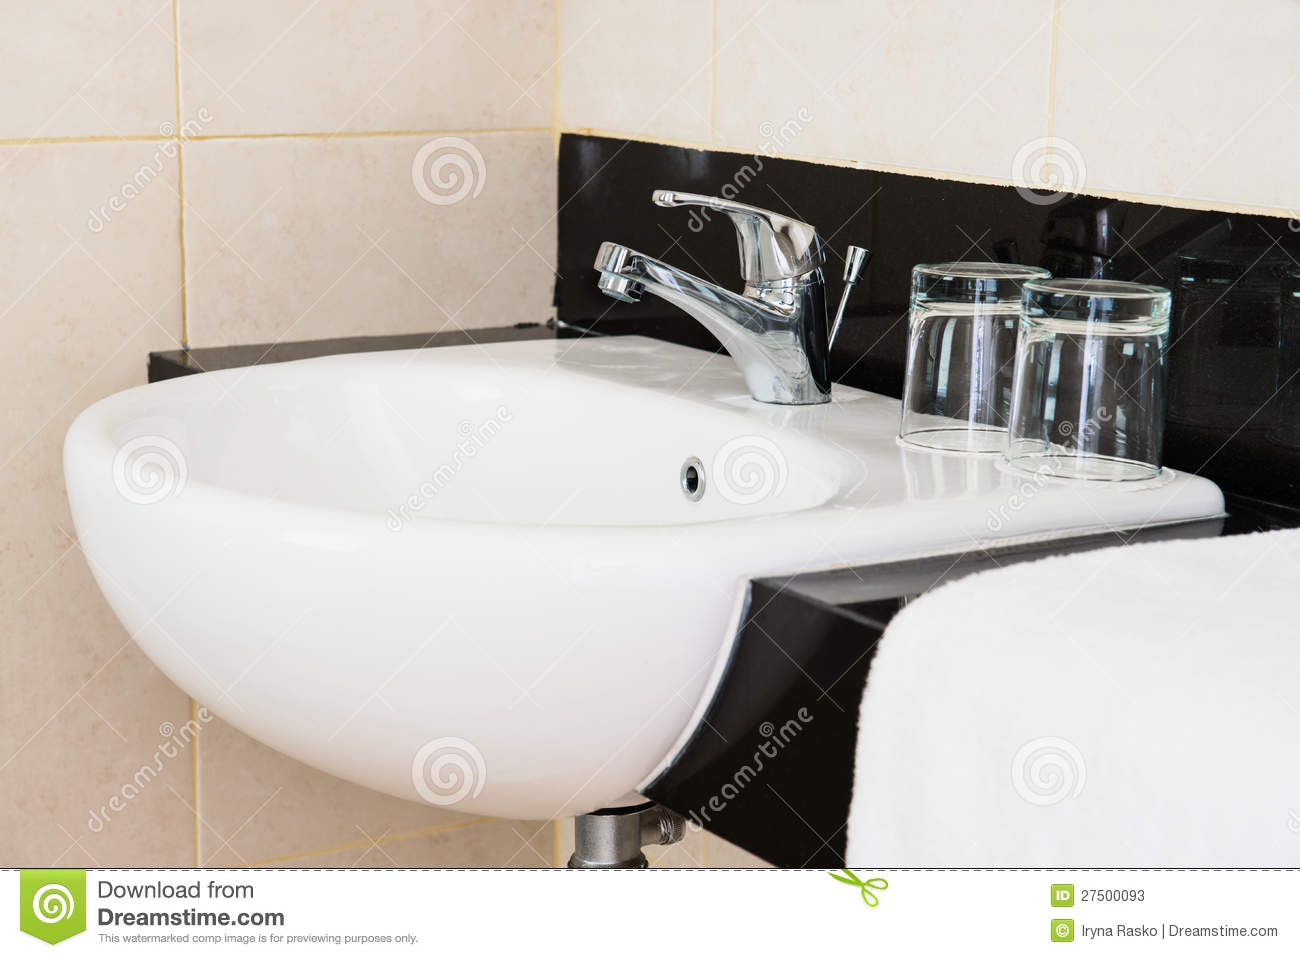 Ceramic Hand Wash Basin In A Hotel With Chrome Water Mixer Tap White    